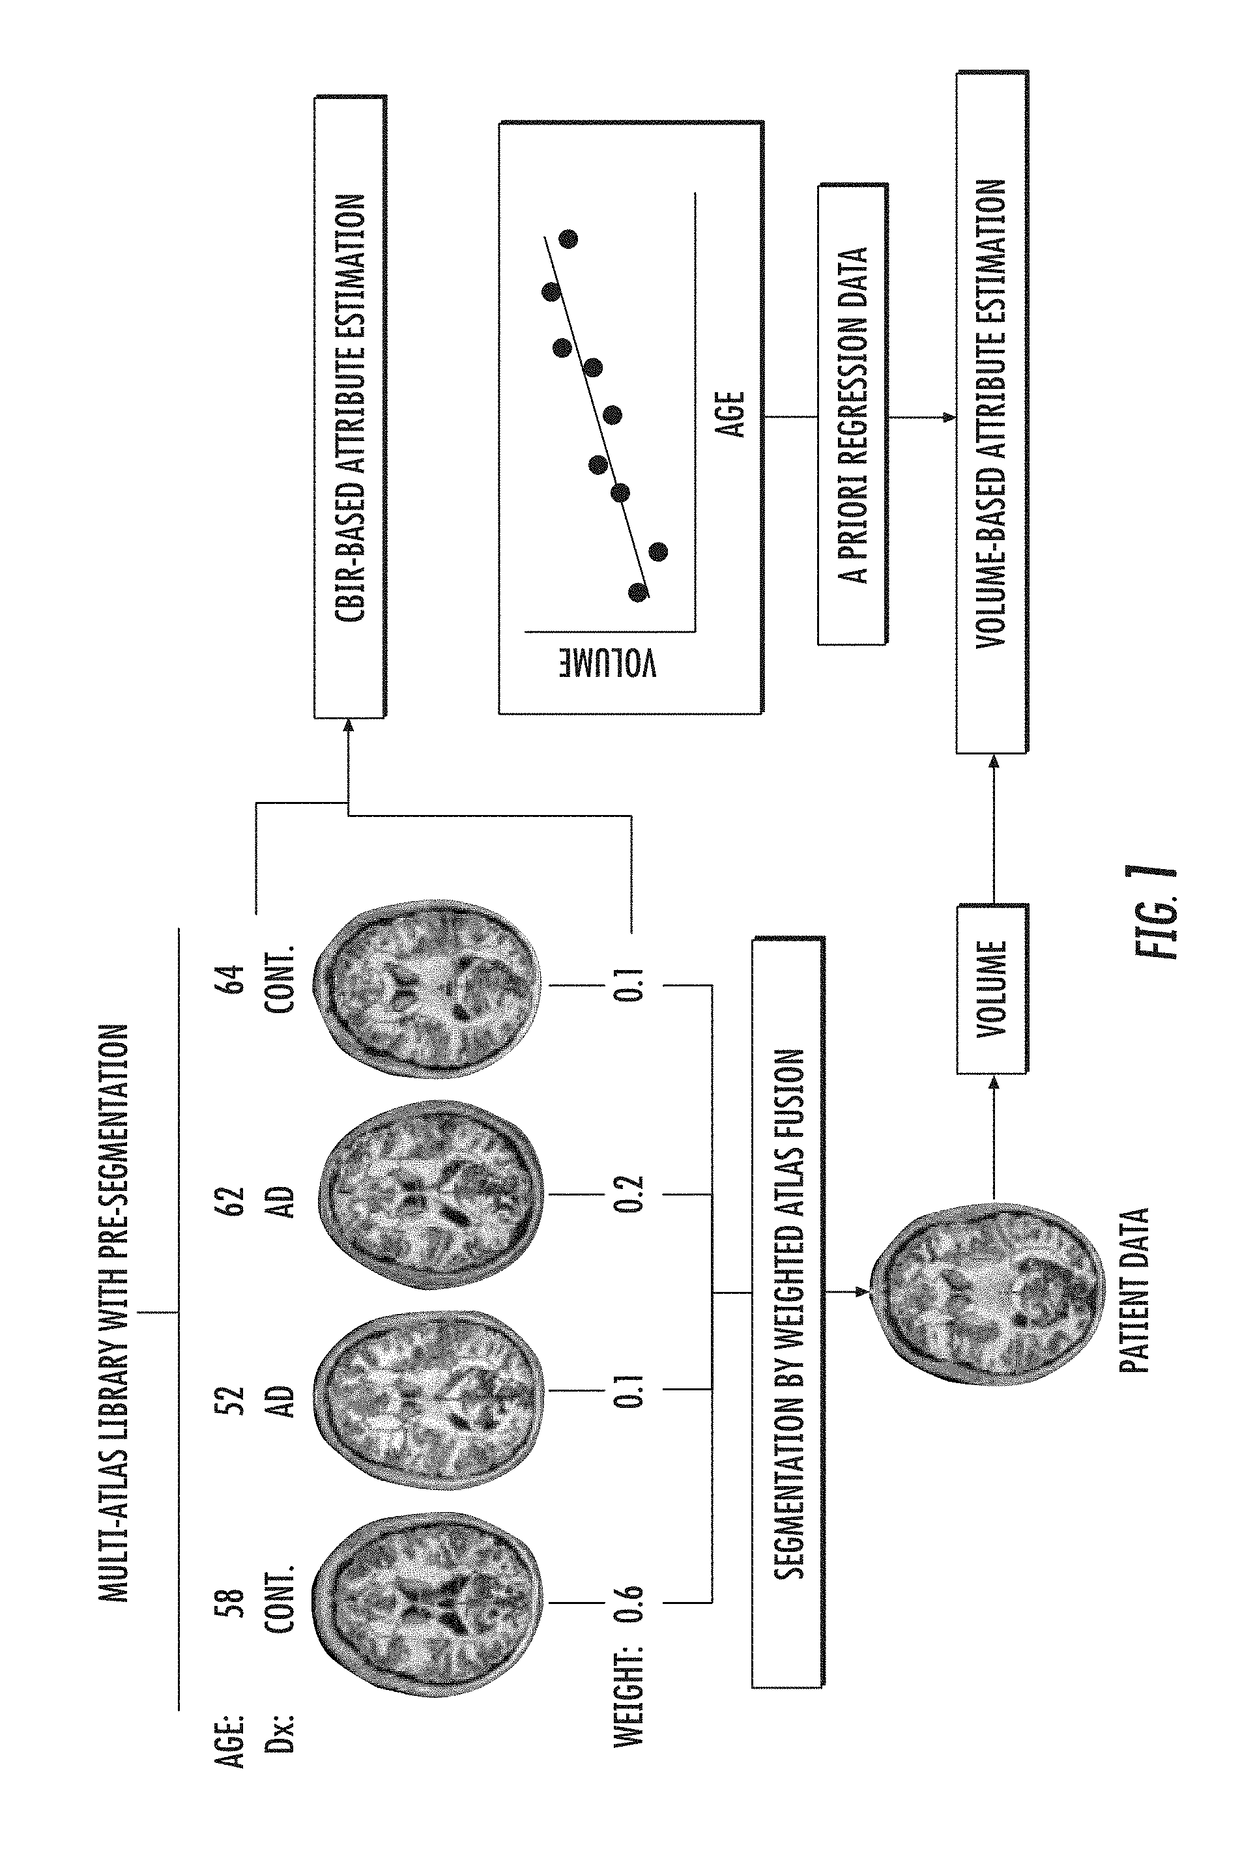 Direct estimation of patient attributes based on MRI brain atlases